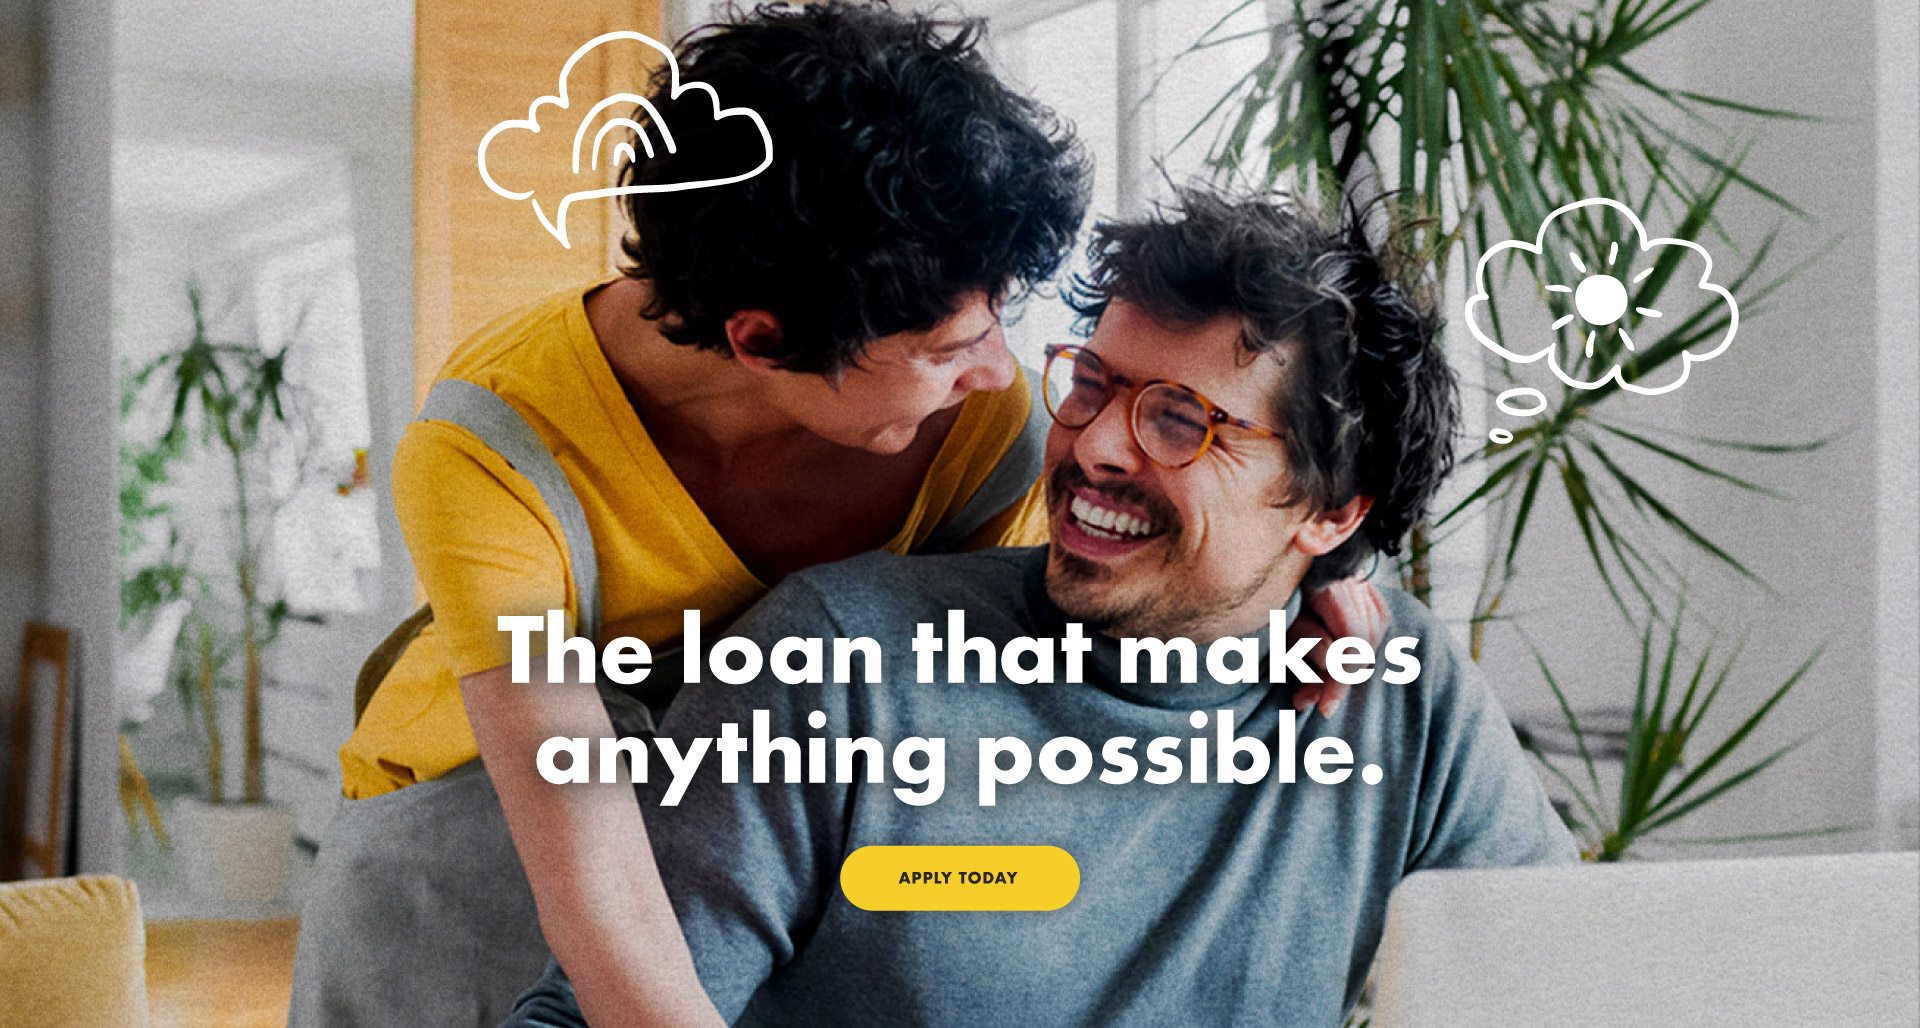 THE LOAN THAT MAKES ANYTHING POSSIBLE. Apply today.